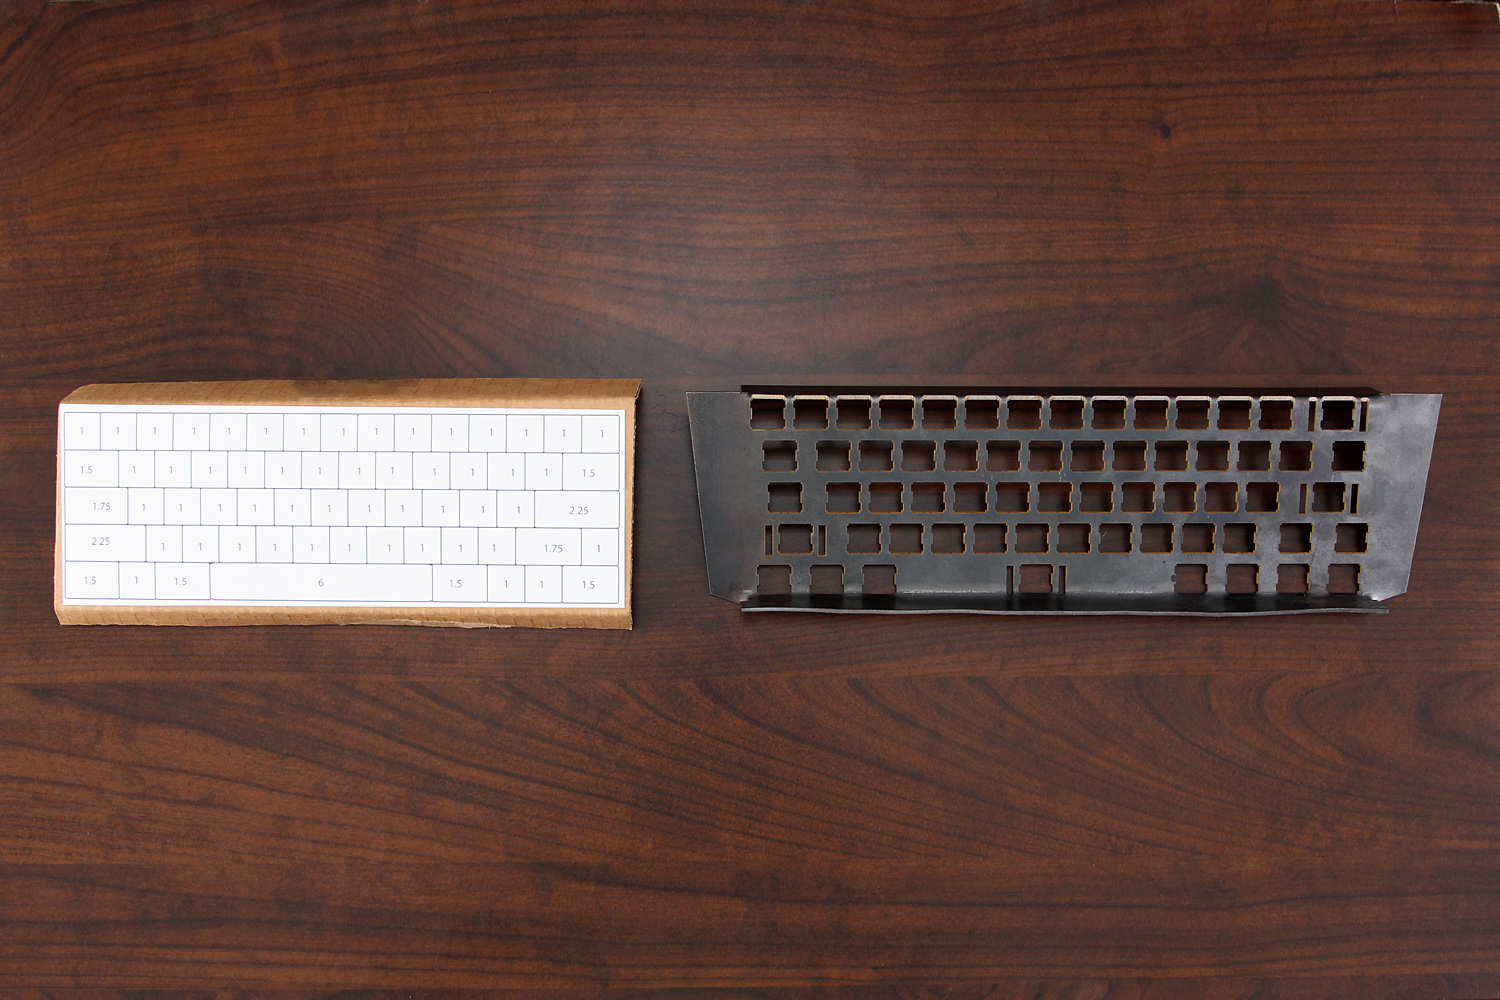 The 1300-Person Quest To Build The Perfect Mechanical Keyboard